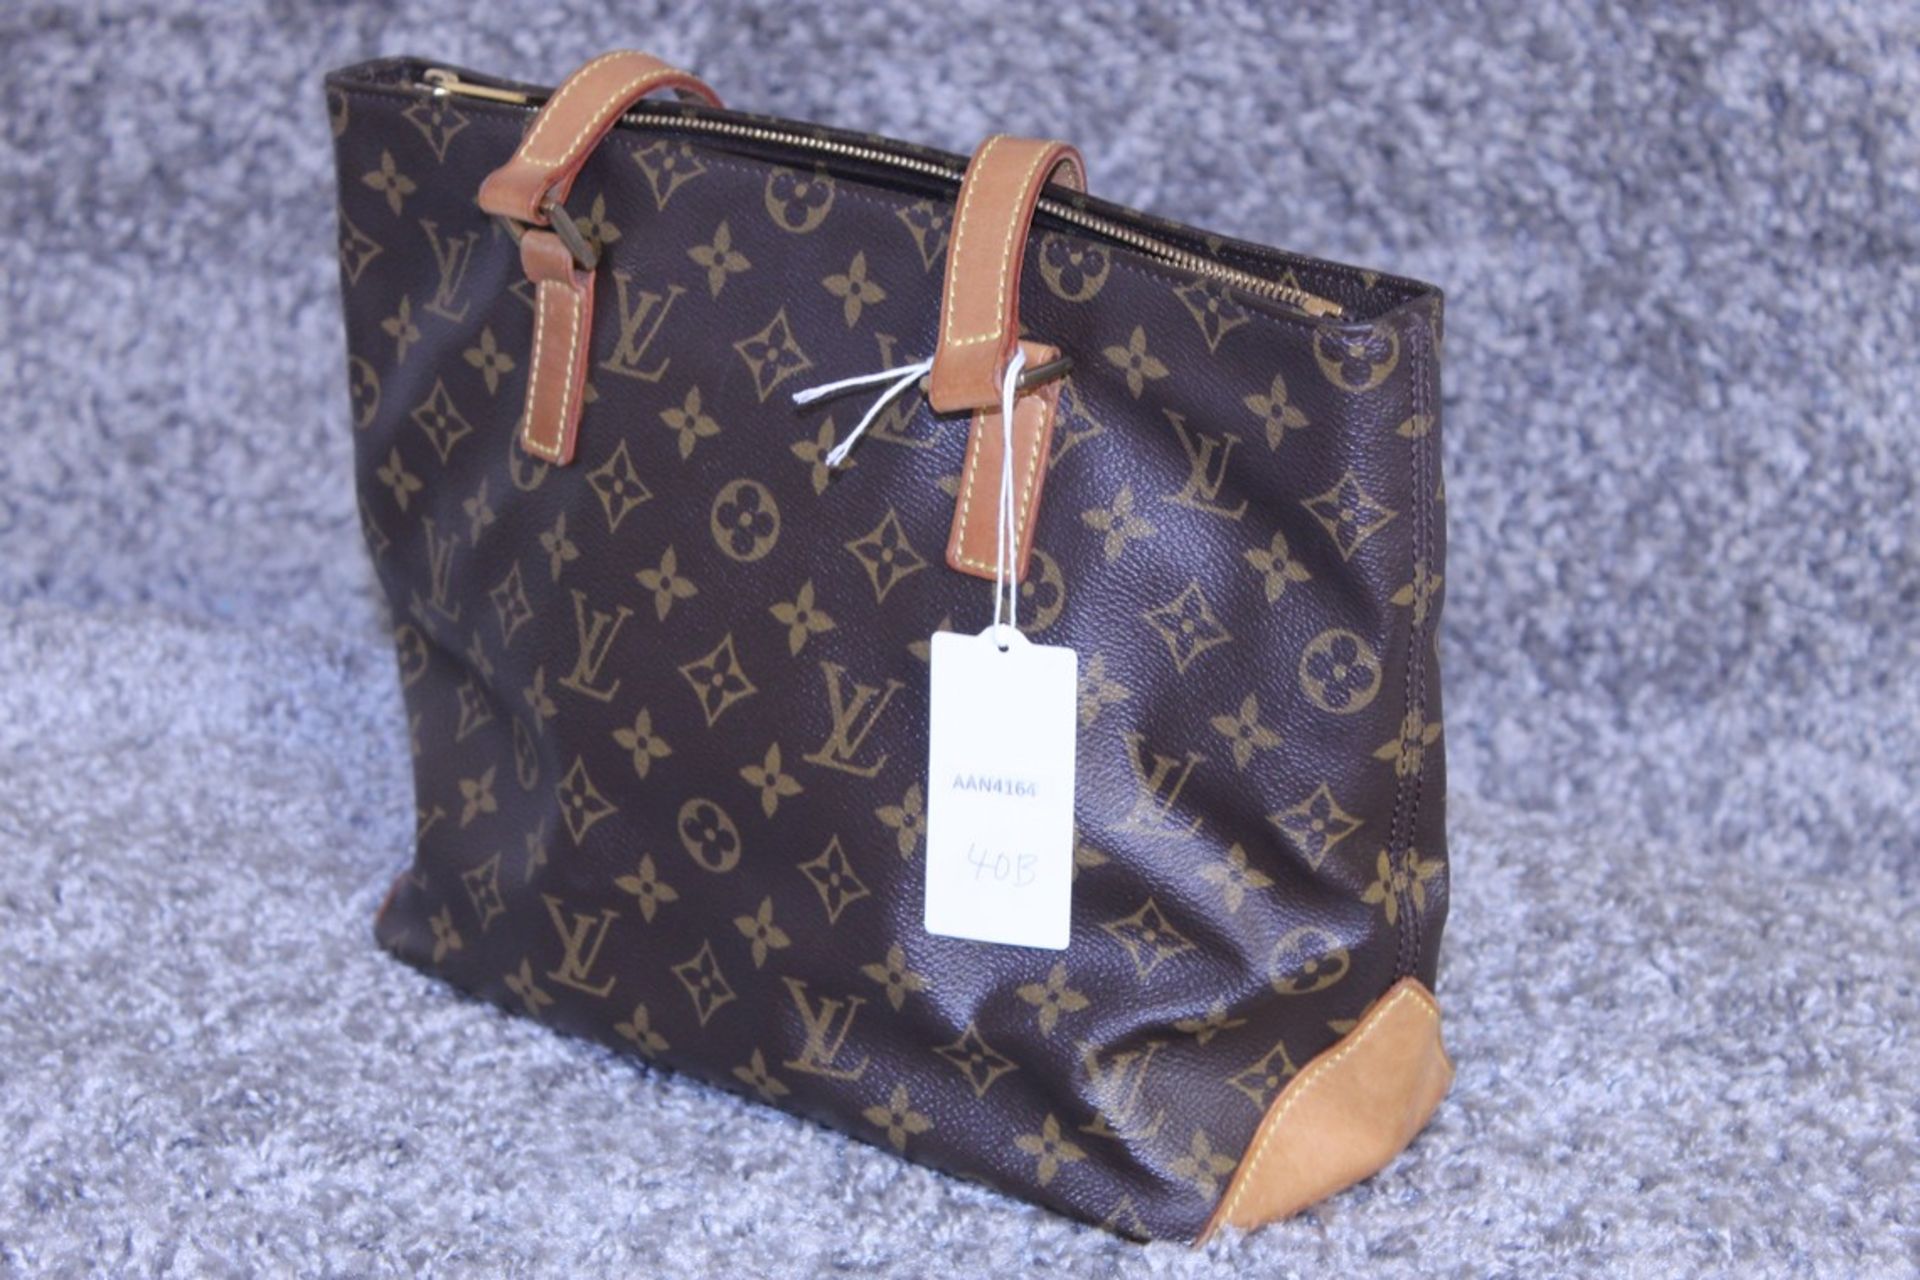 RRP £1970.00 Brown And Beige Leather Cabas Piano Tote Bag From Louis Vuitton Featuring A Monogram - Image 3 of 6